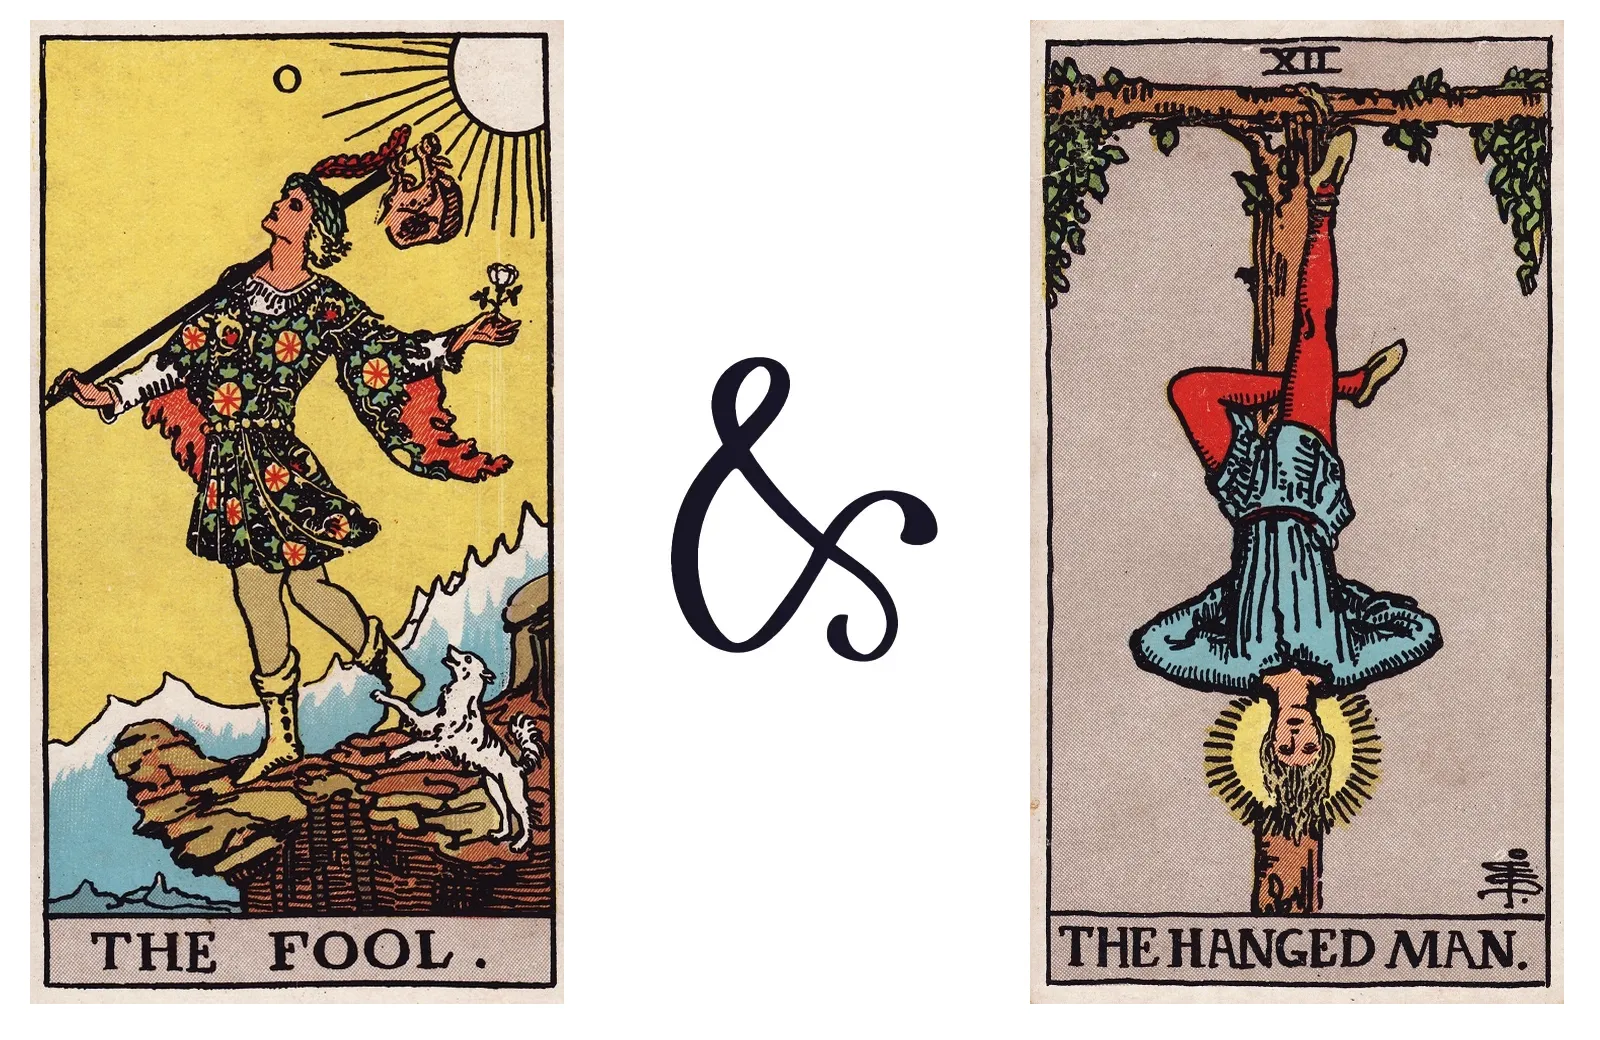 The Fool and The Hanged Man